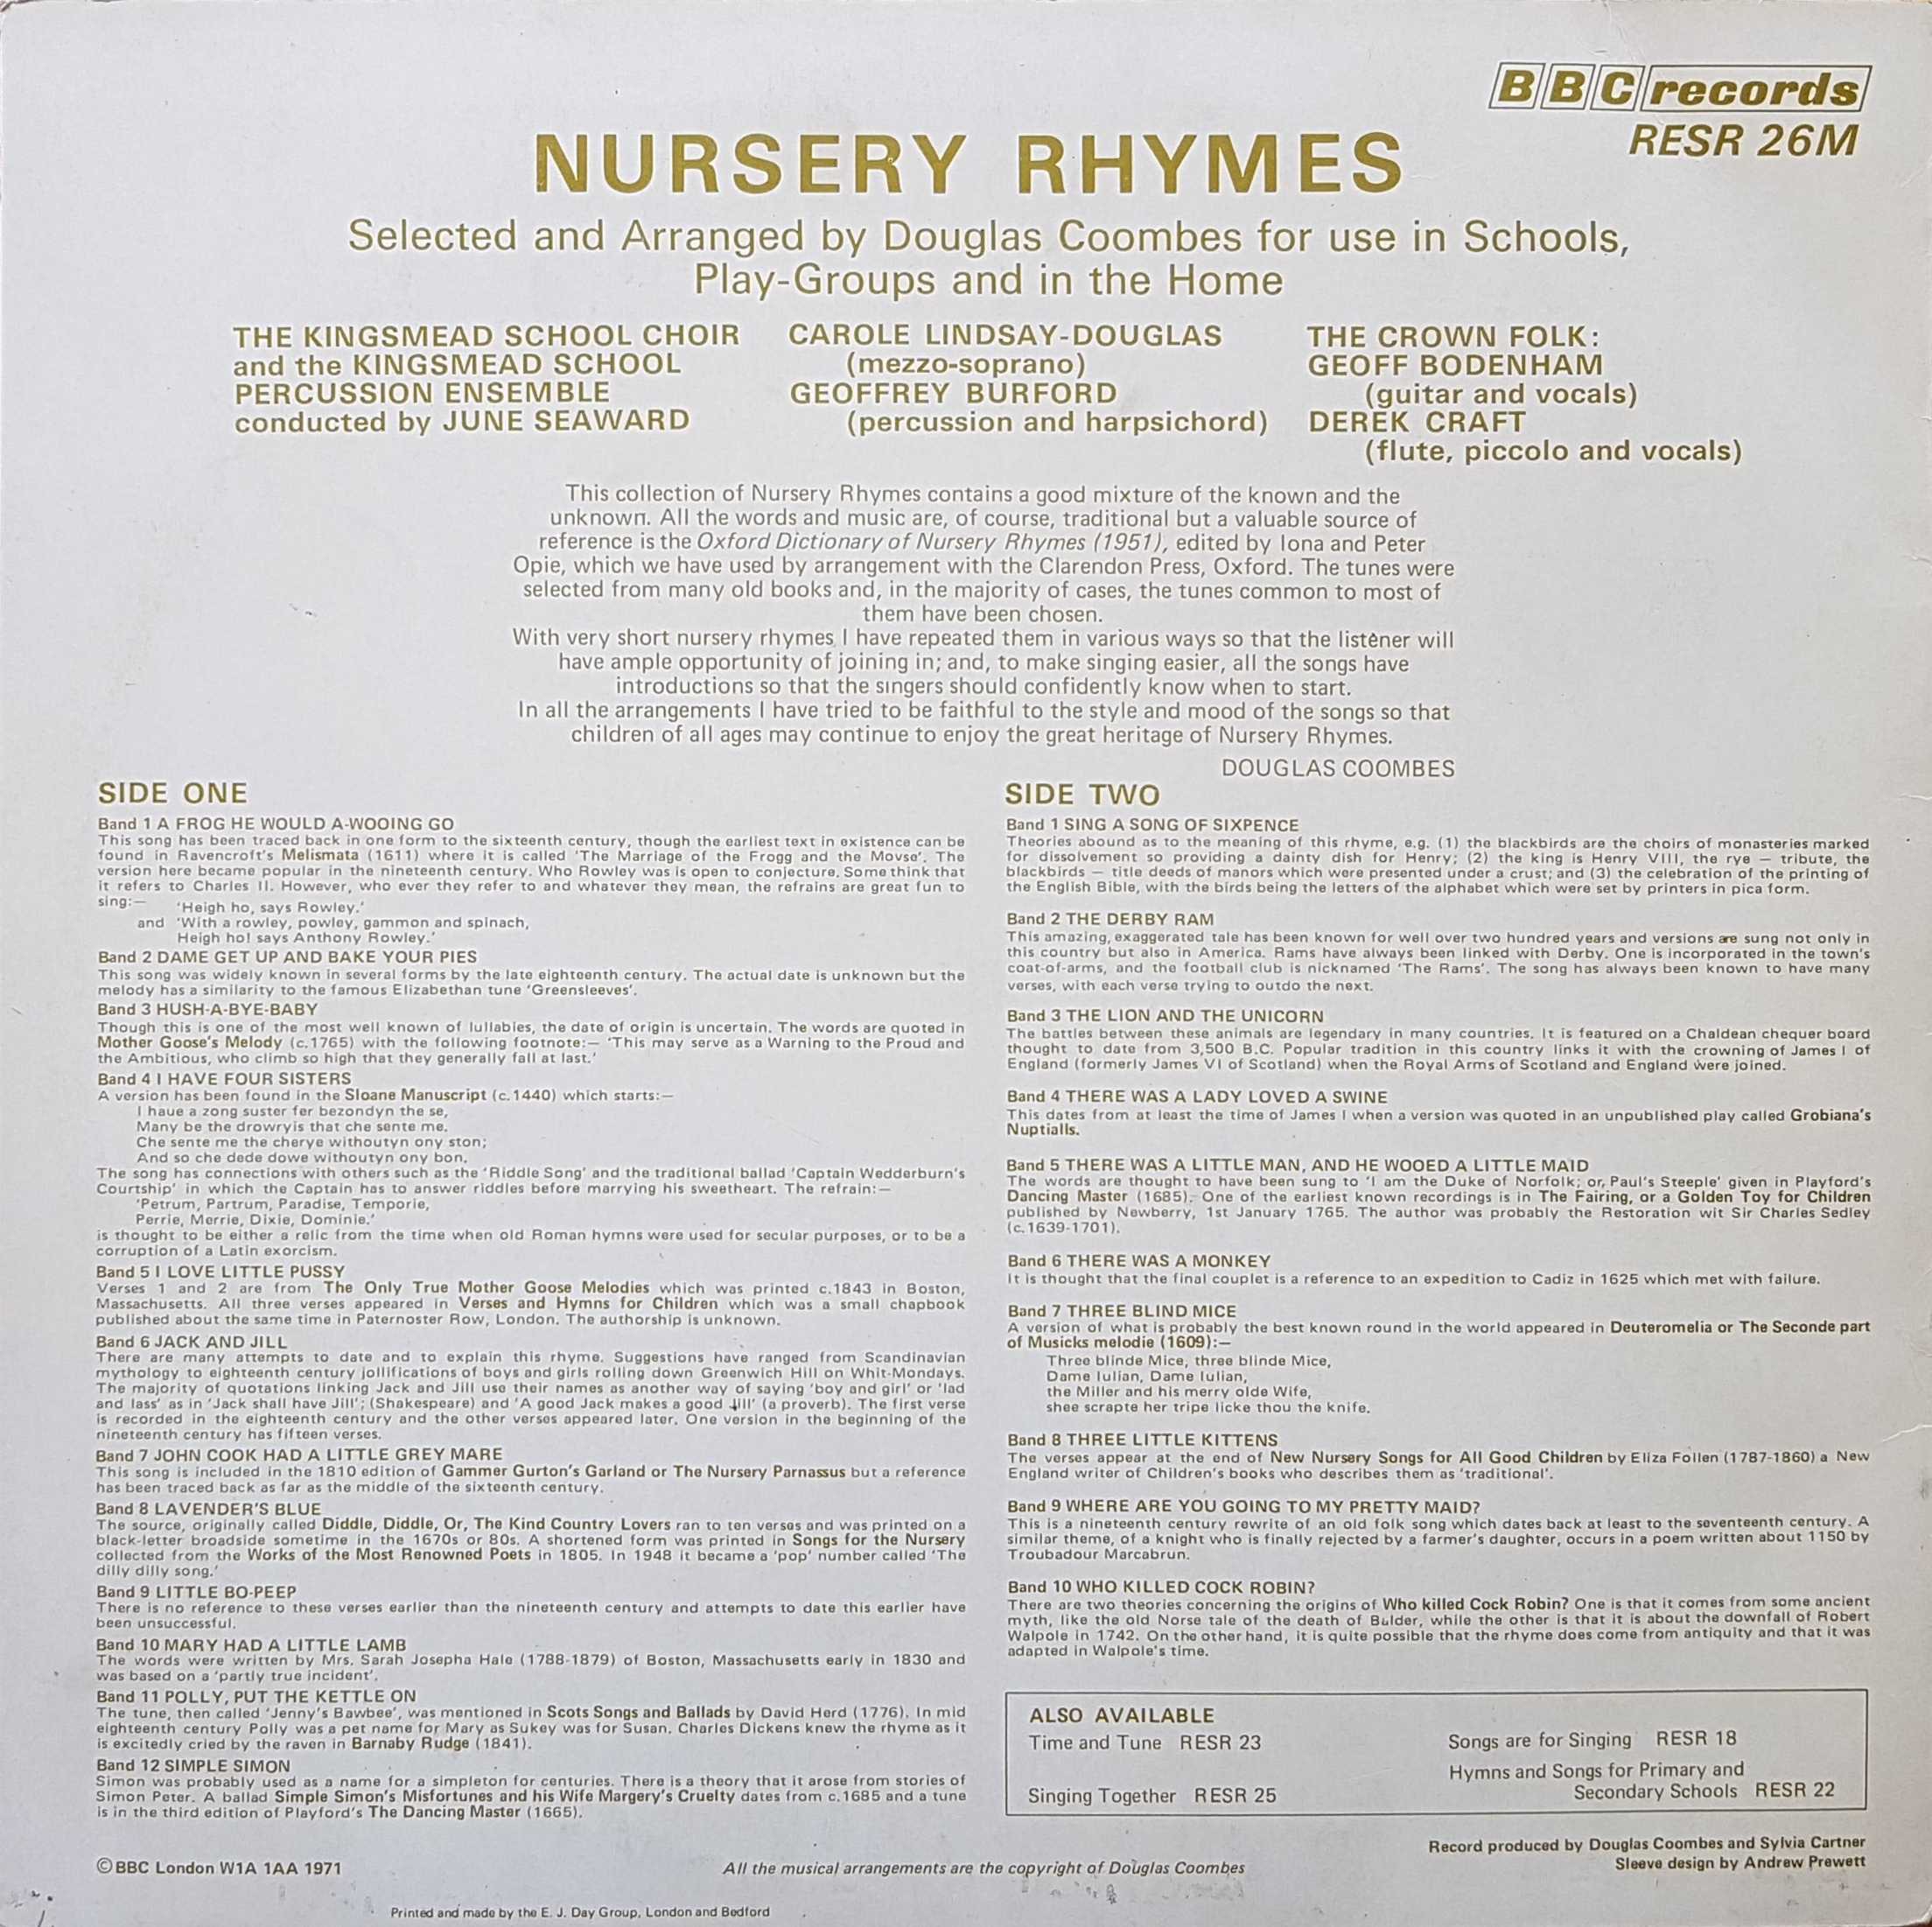 Picture of RESR 26 Nursery rhymes by artist Douglas Coombes from the BBC records and Tapes library